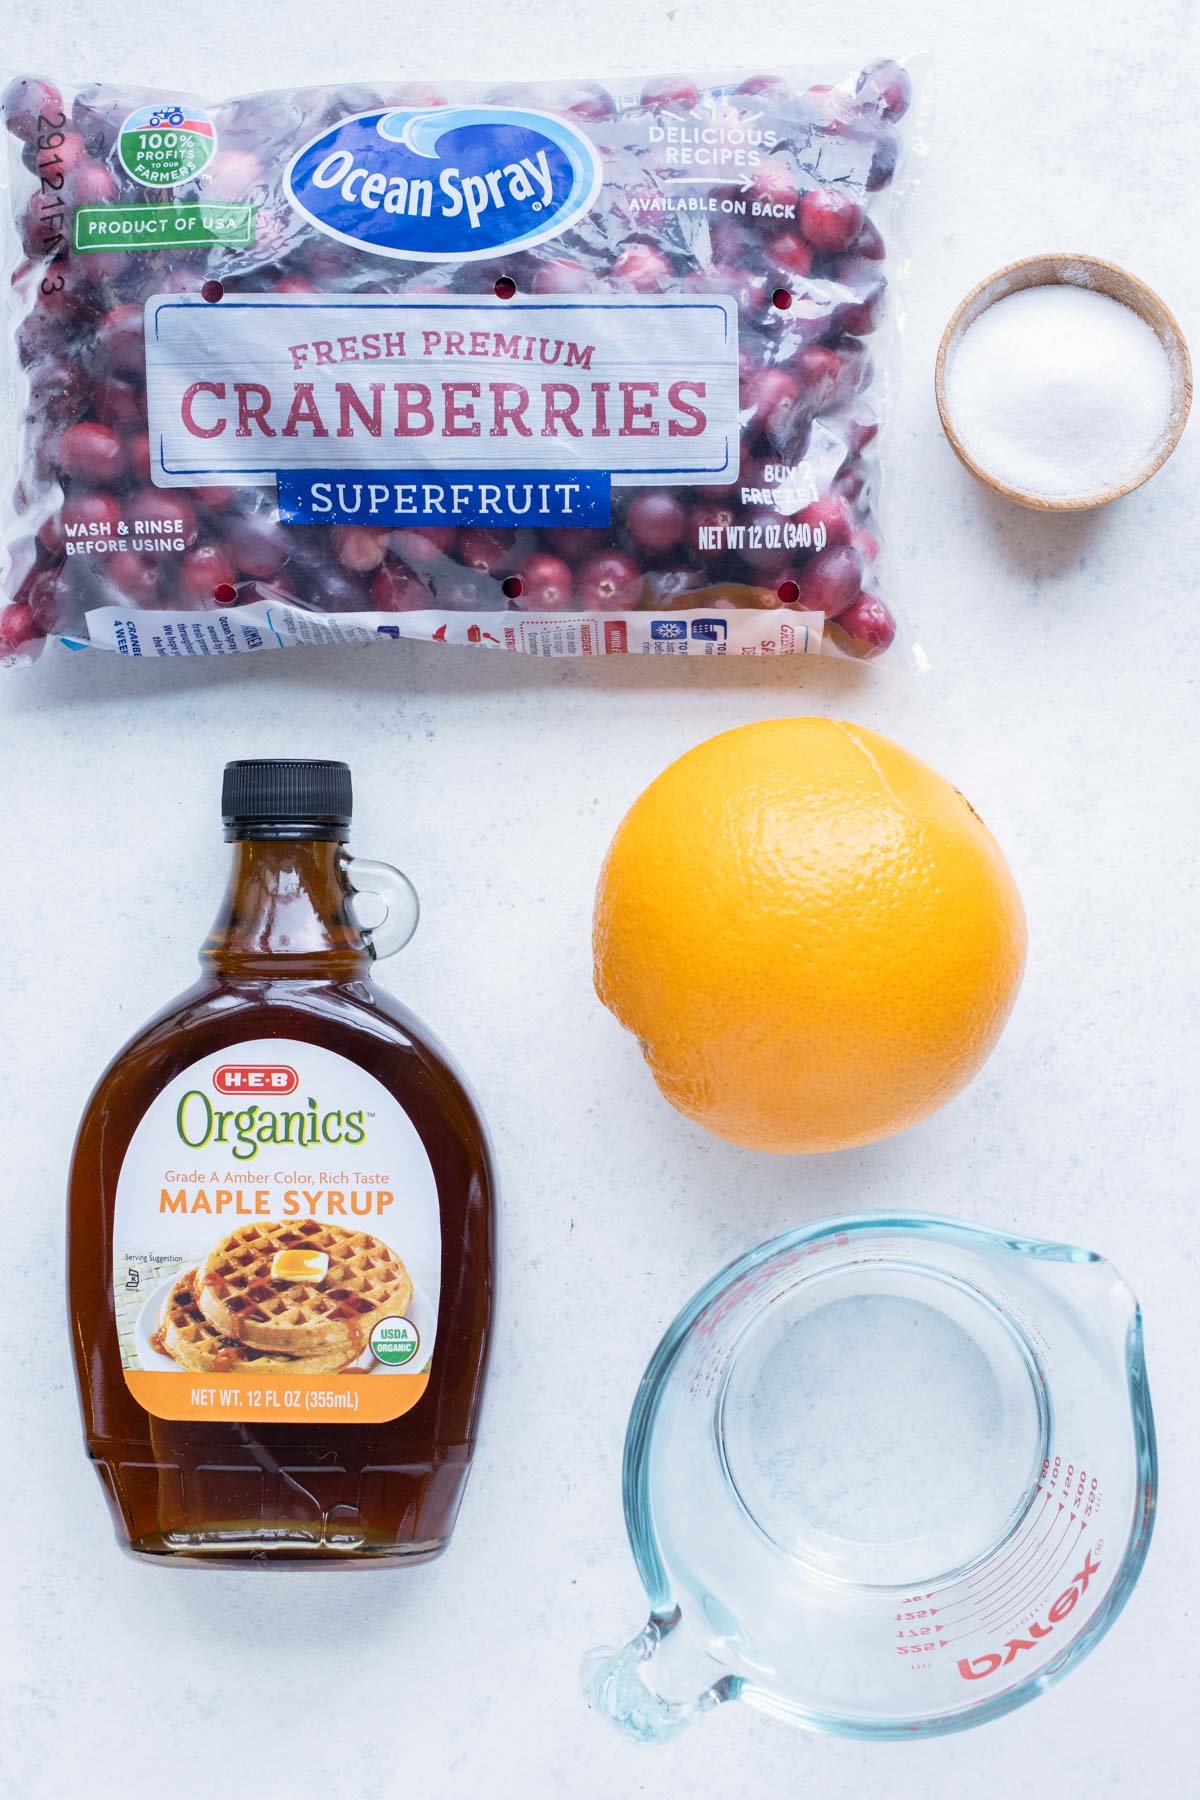 Maple syrup, orange, water, salt, and cranberries are the ingredients in this recipe.